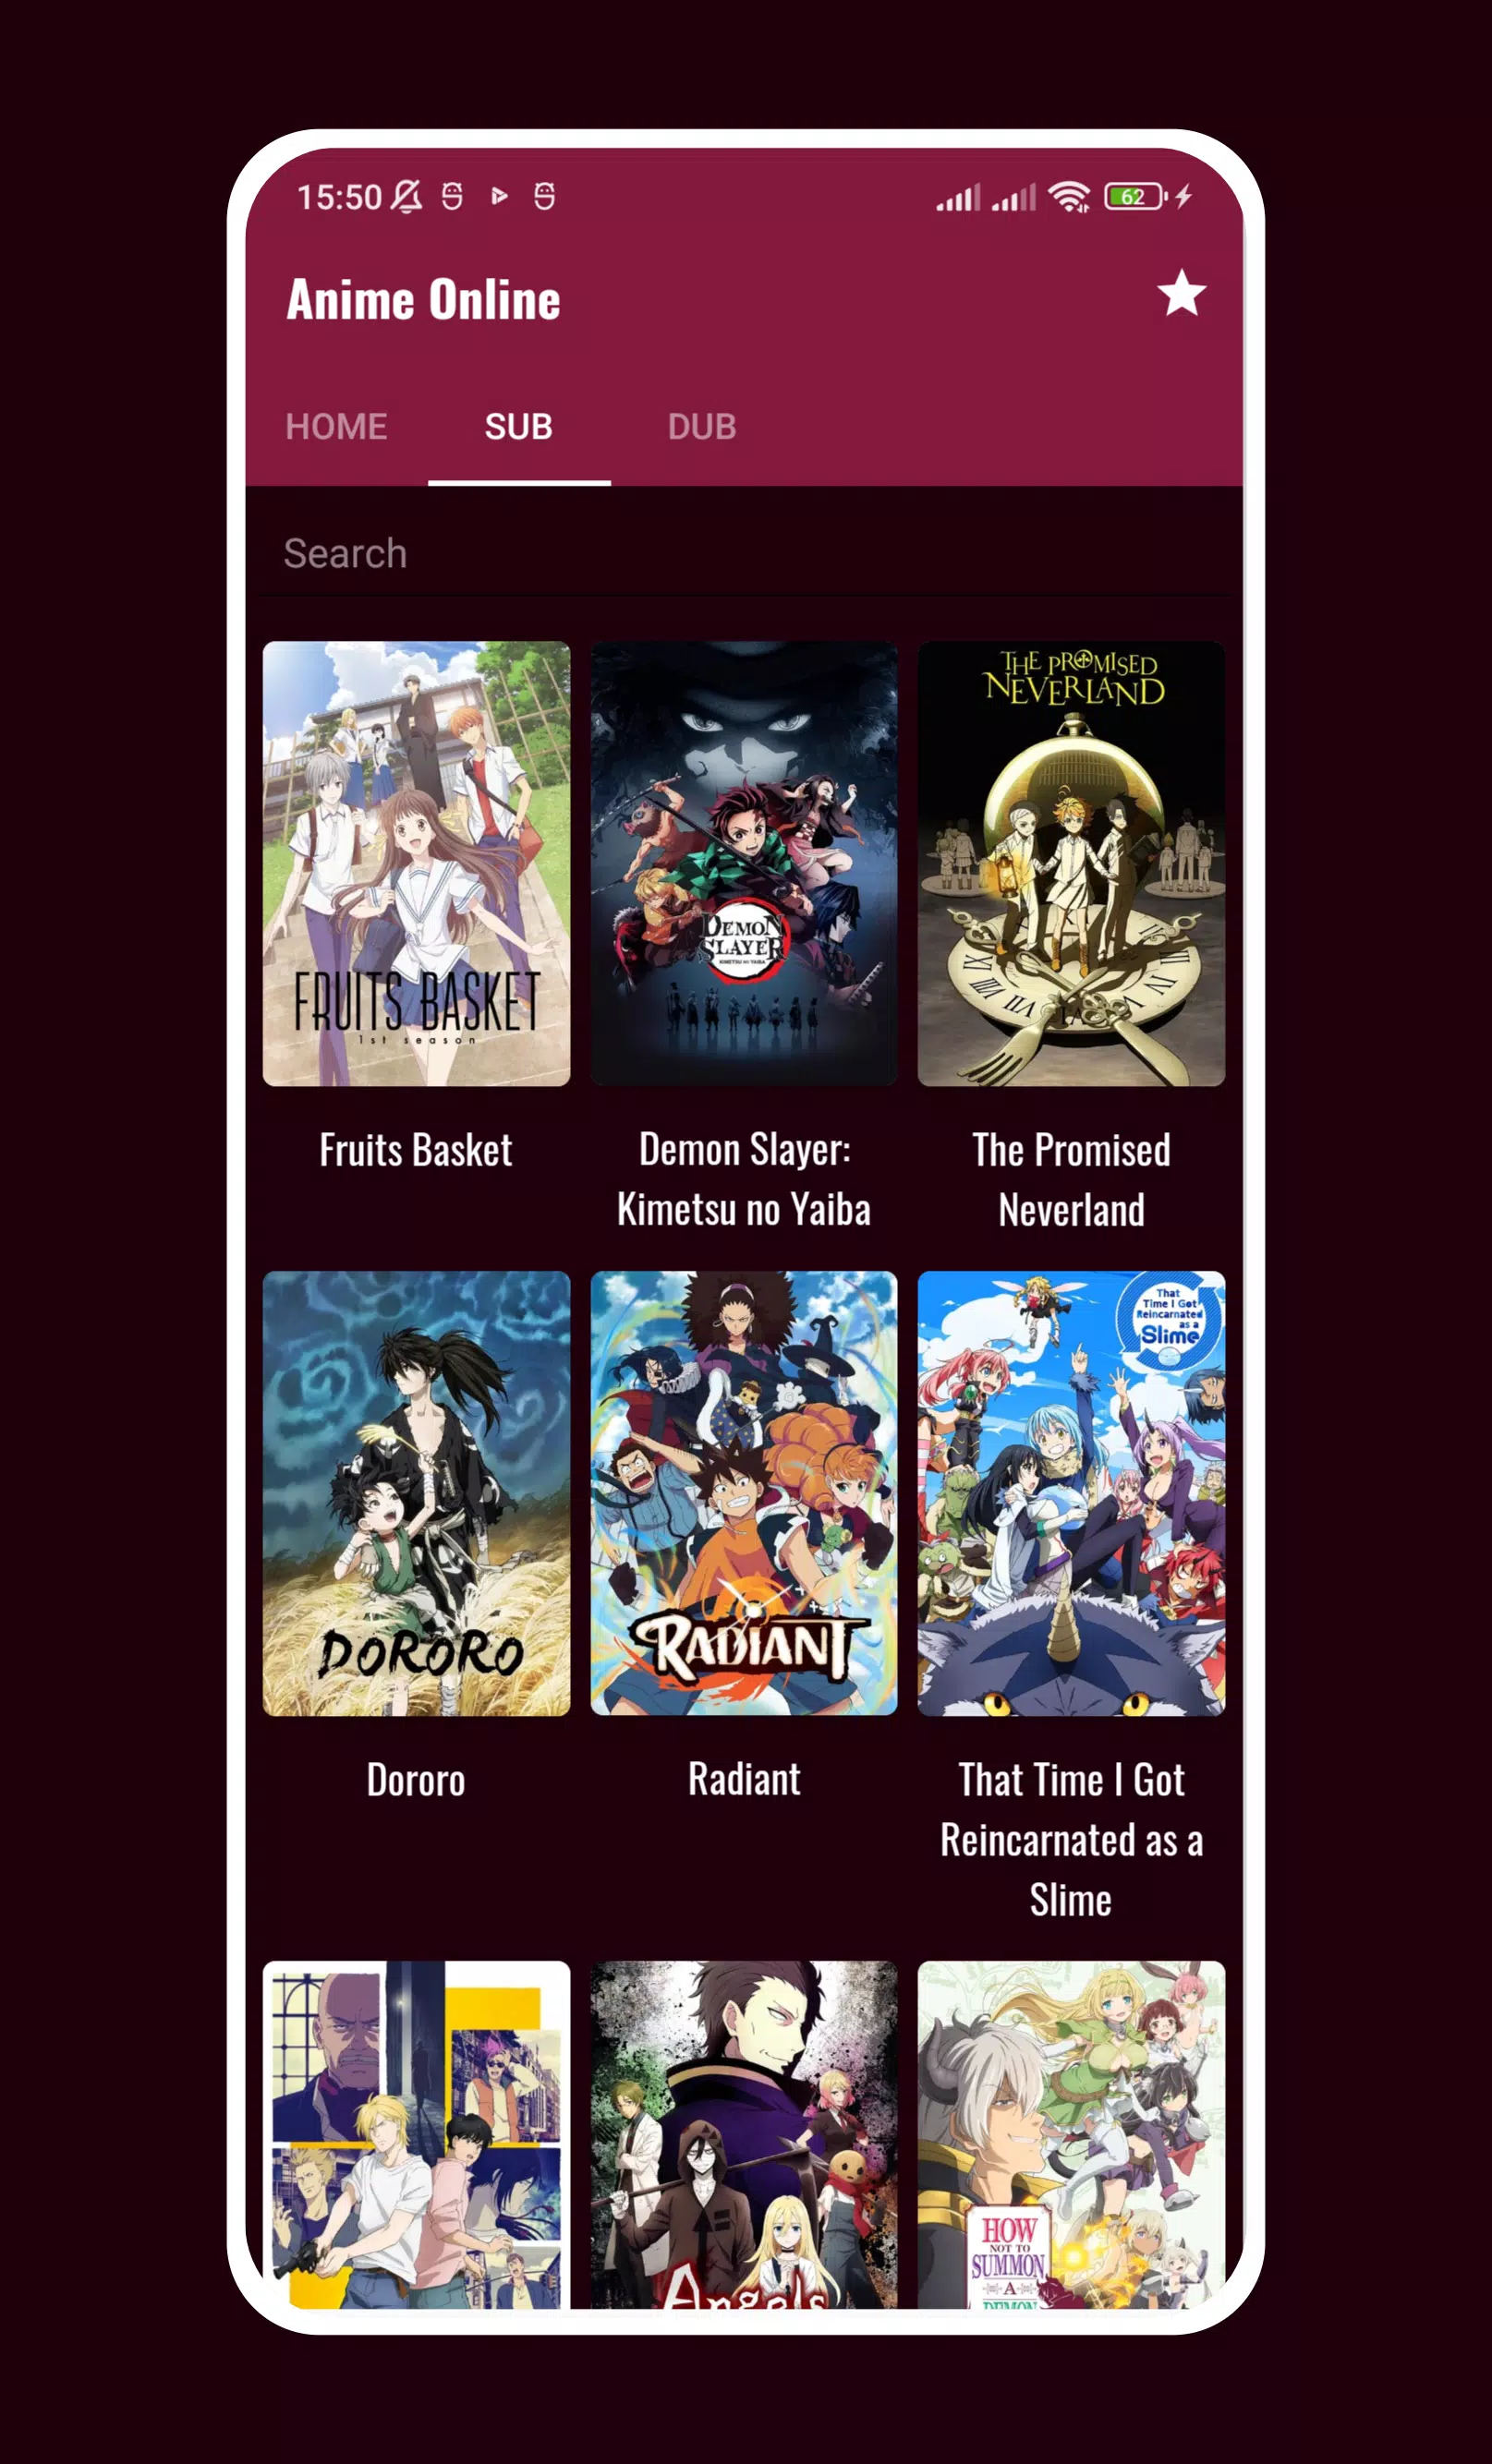 Download Anime Online Sub Dub English Free for Android - Anime